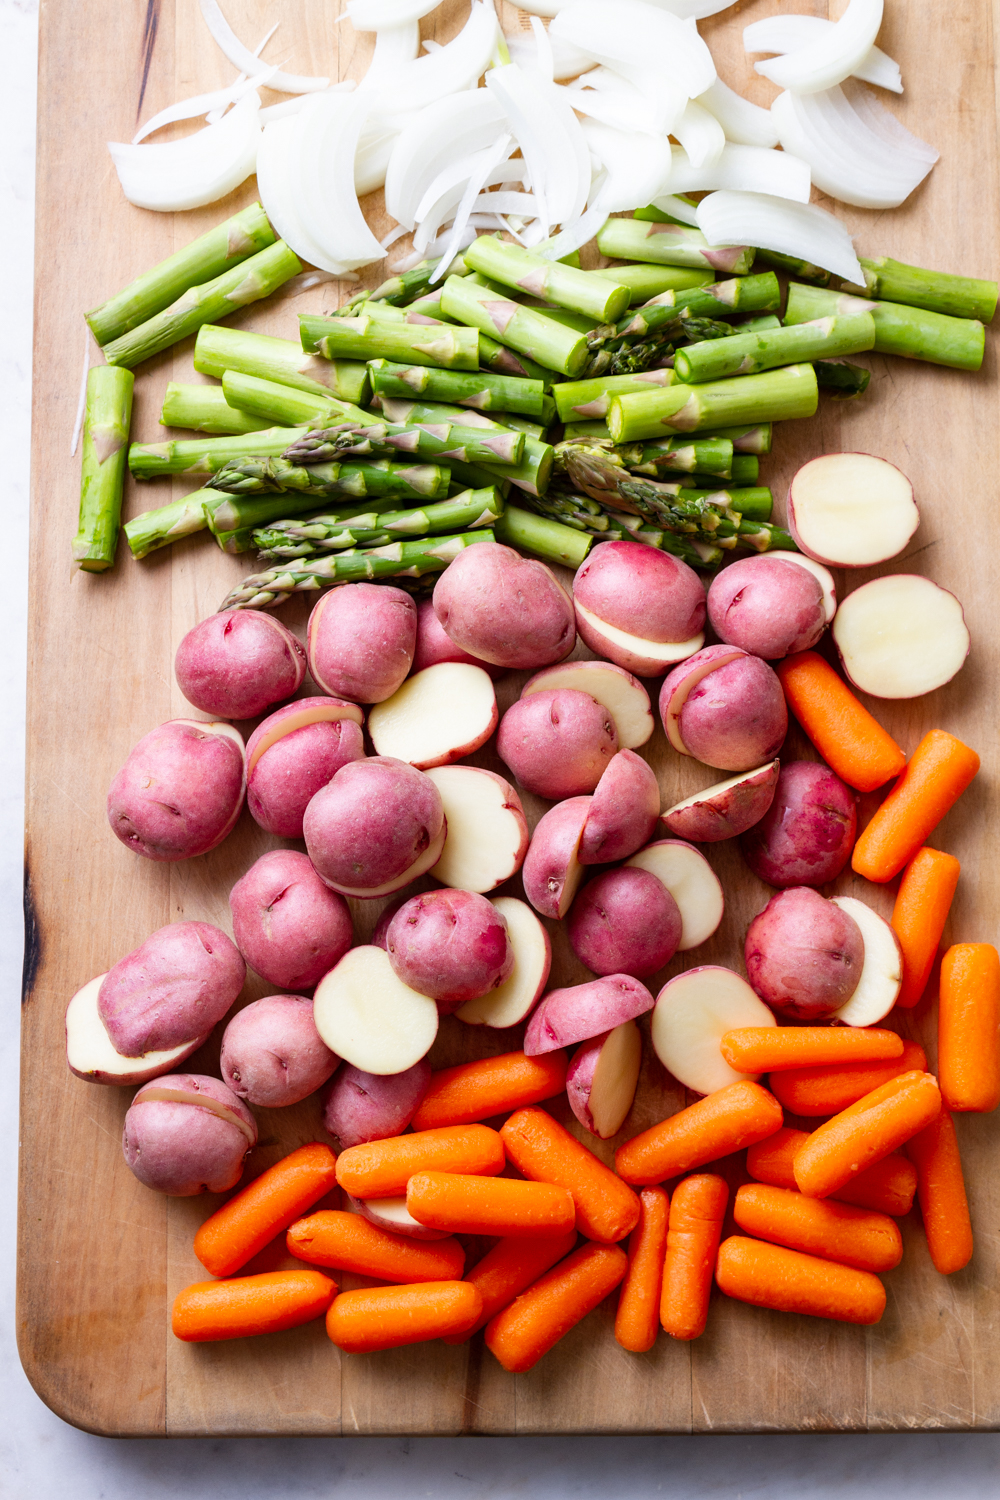 prepped carrots, asparagus, red potatoes and onion on a cutting board